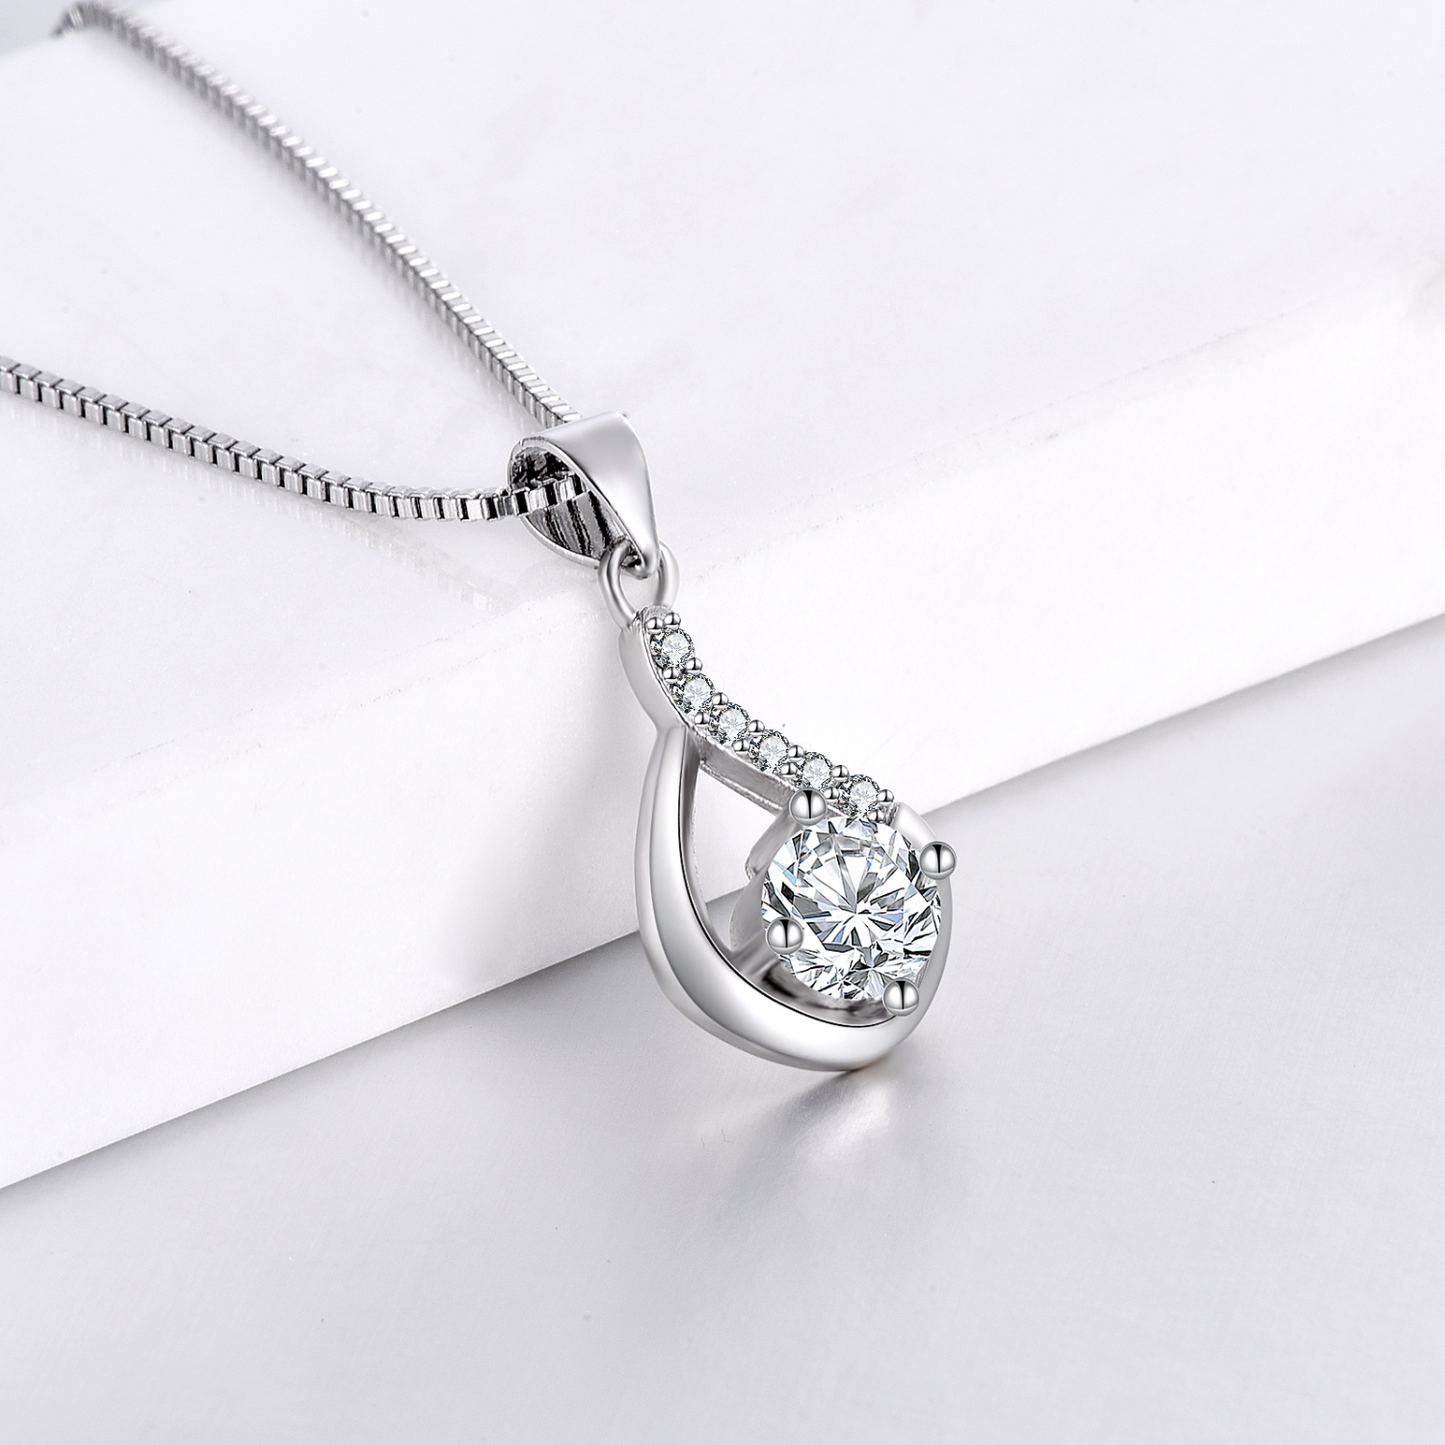 To My Beautiful Daughter - Love Drop Necklace With Card From Mom